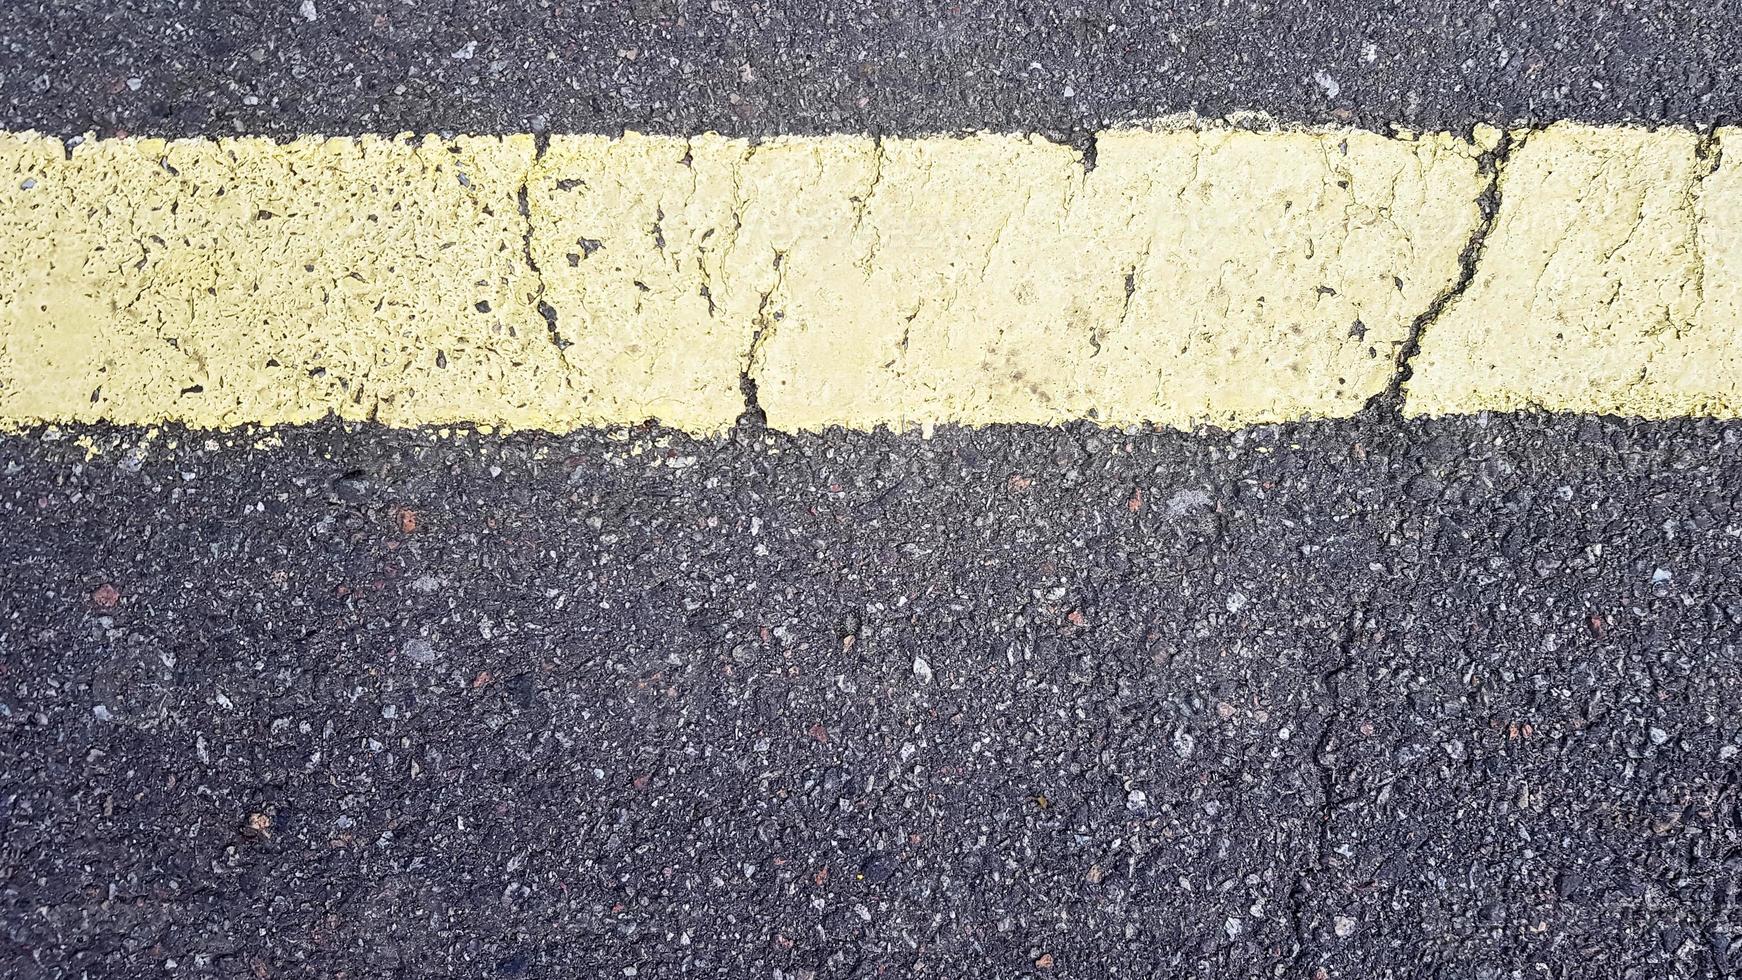 yellow horizontal strip on asphalt. Detail of a yellow stripe worn over time with a crack, road marking on asphalt. photo